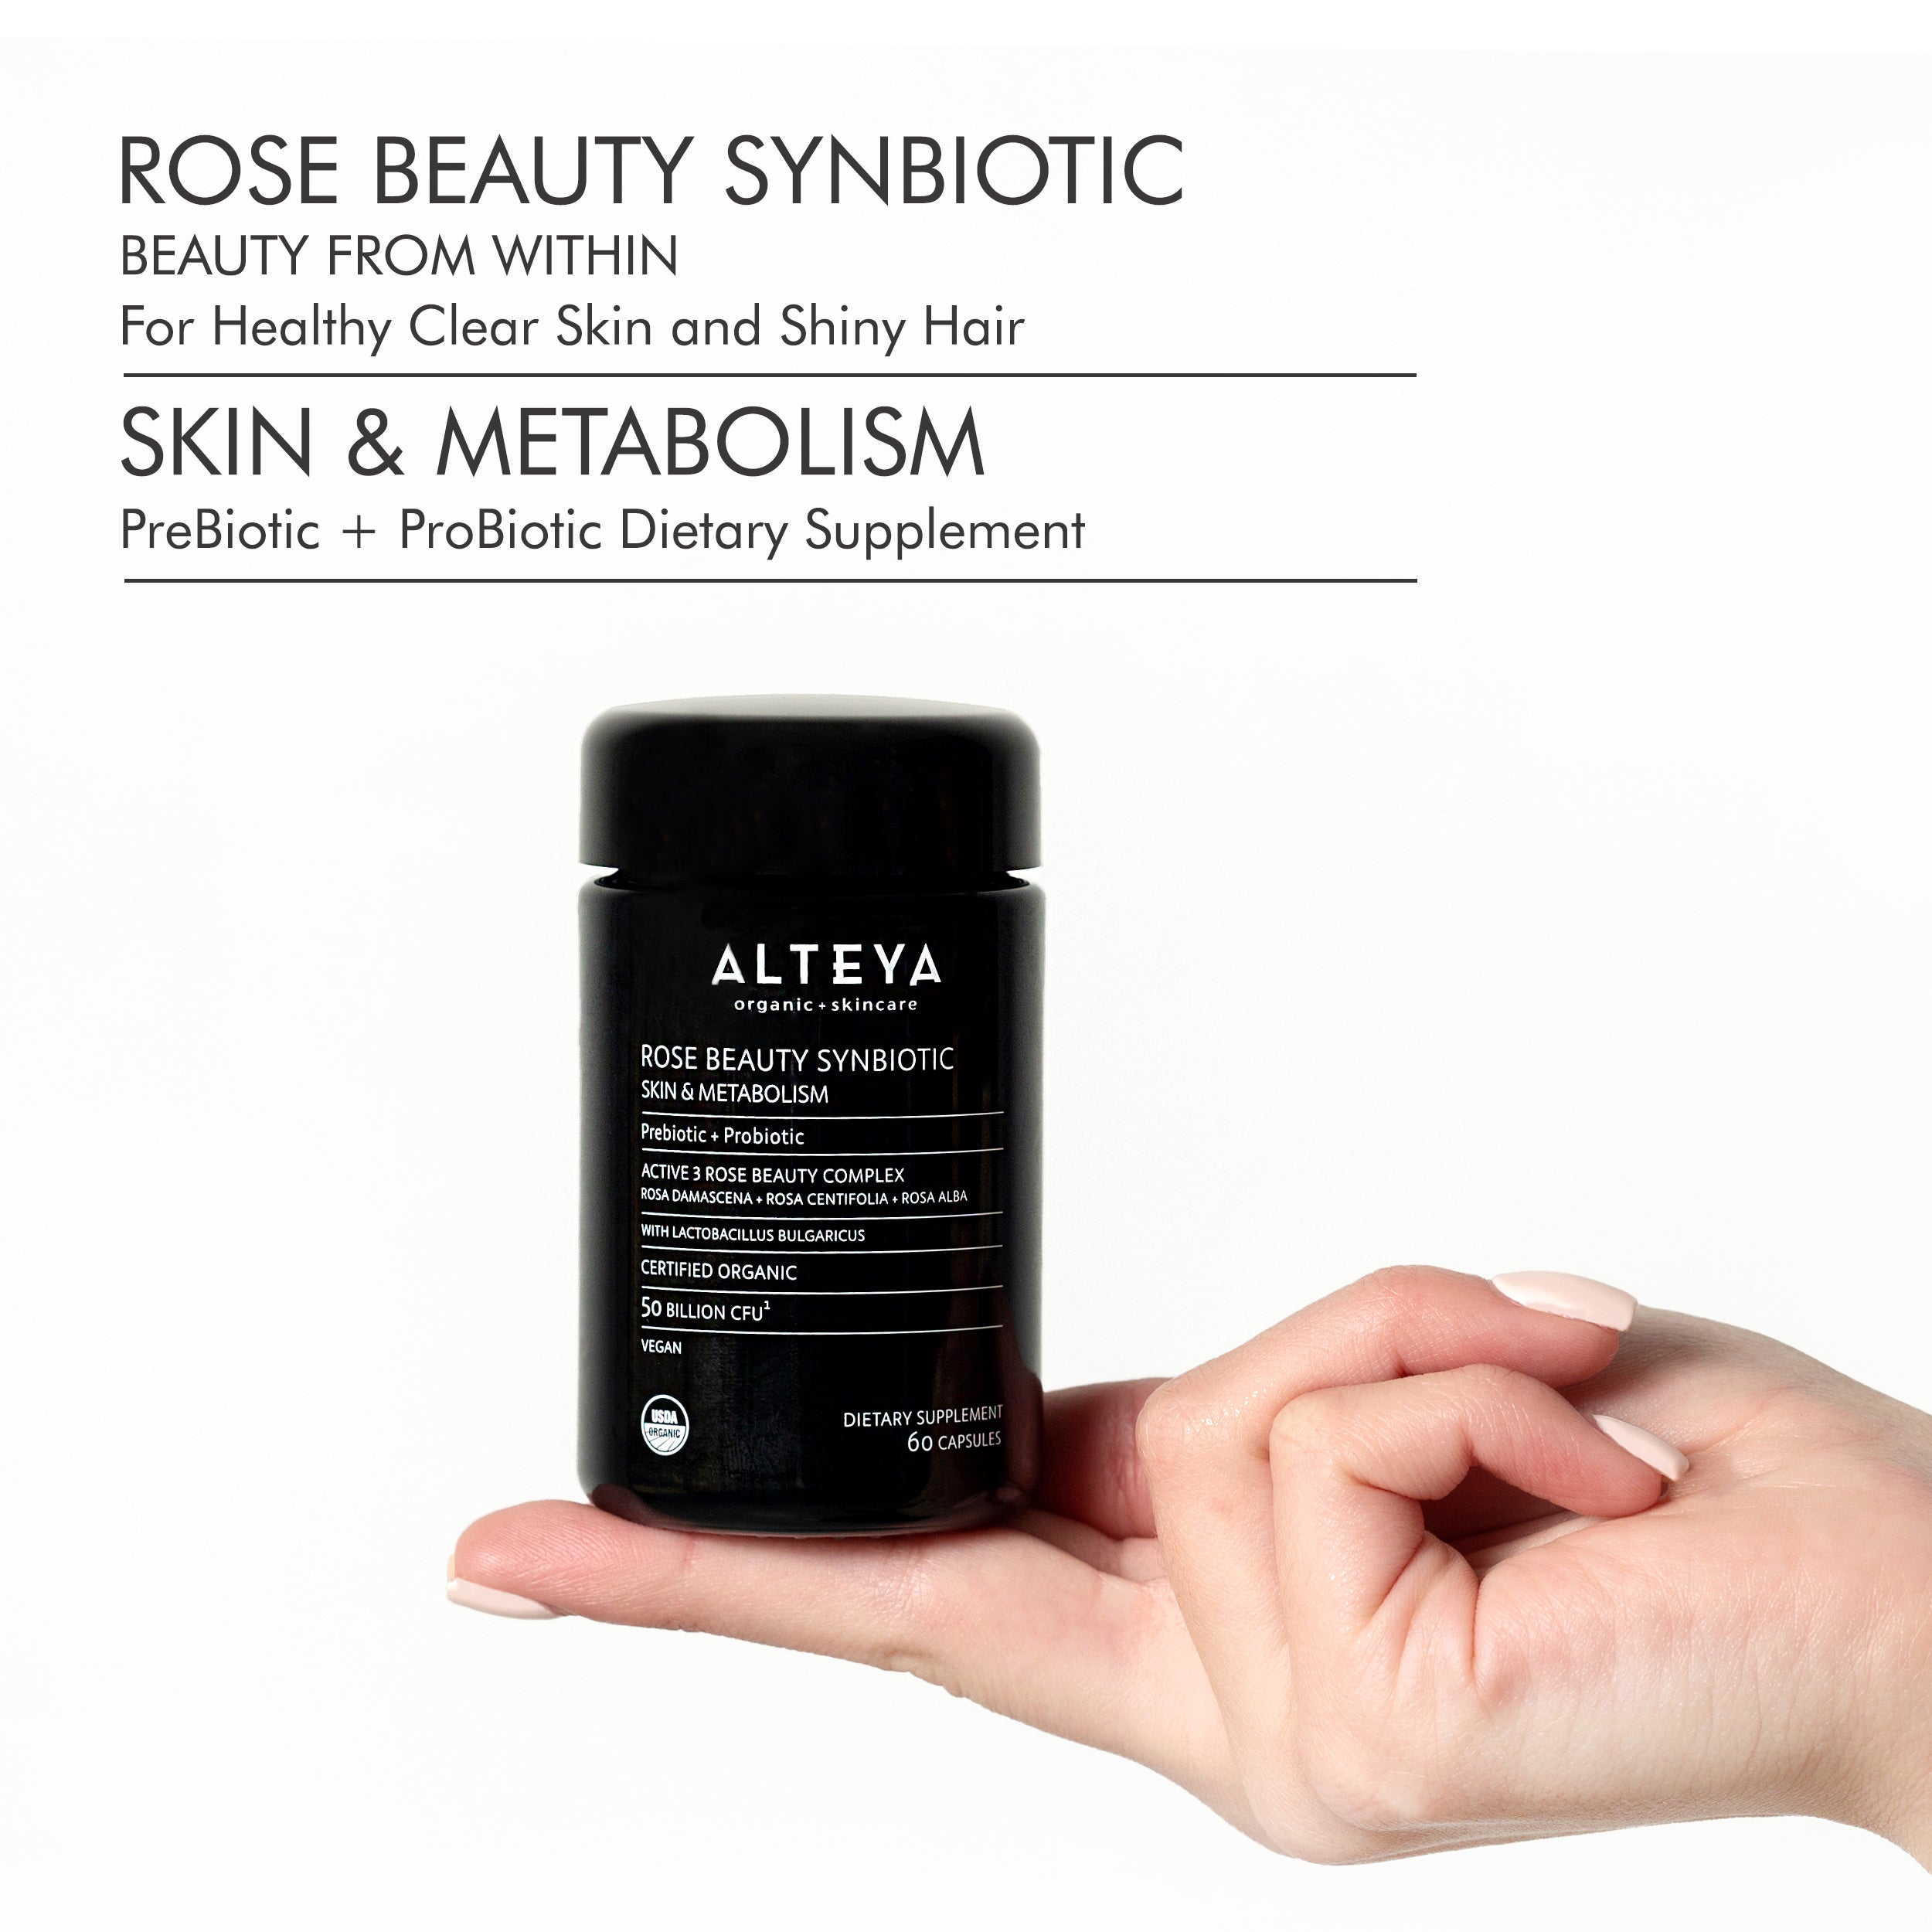 A hand holding a bottle of Alteya Organics Rose Beauty Prebiotic and Probiotic - Synbiotic Skin & Metabolism Vegan Organic Supplement, promoting gut health with its probiotic properties.